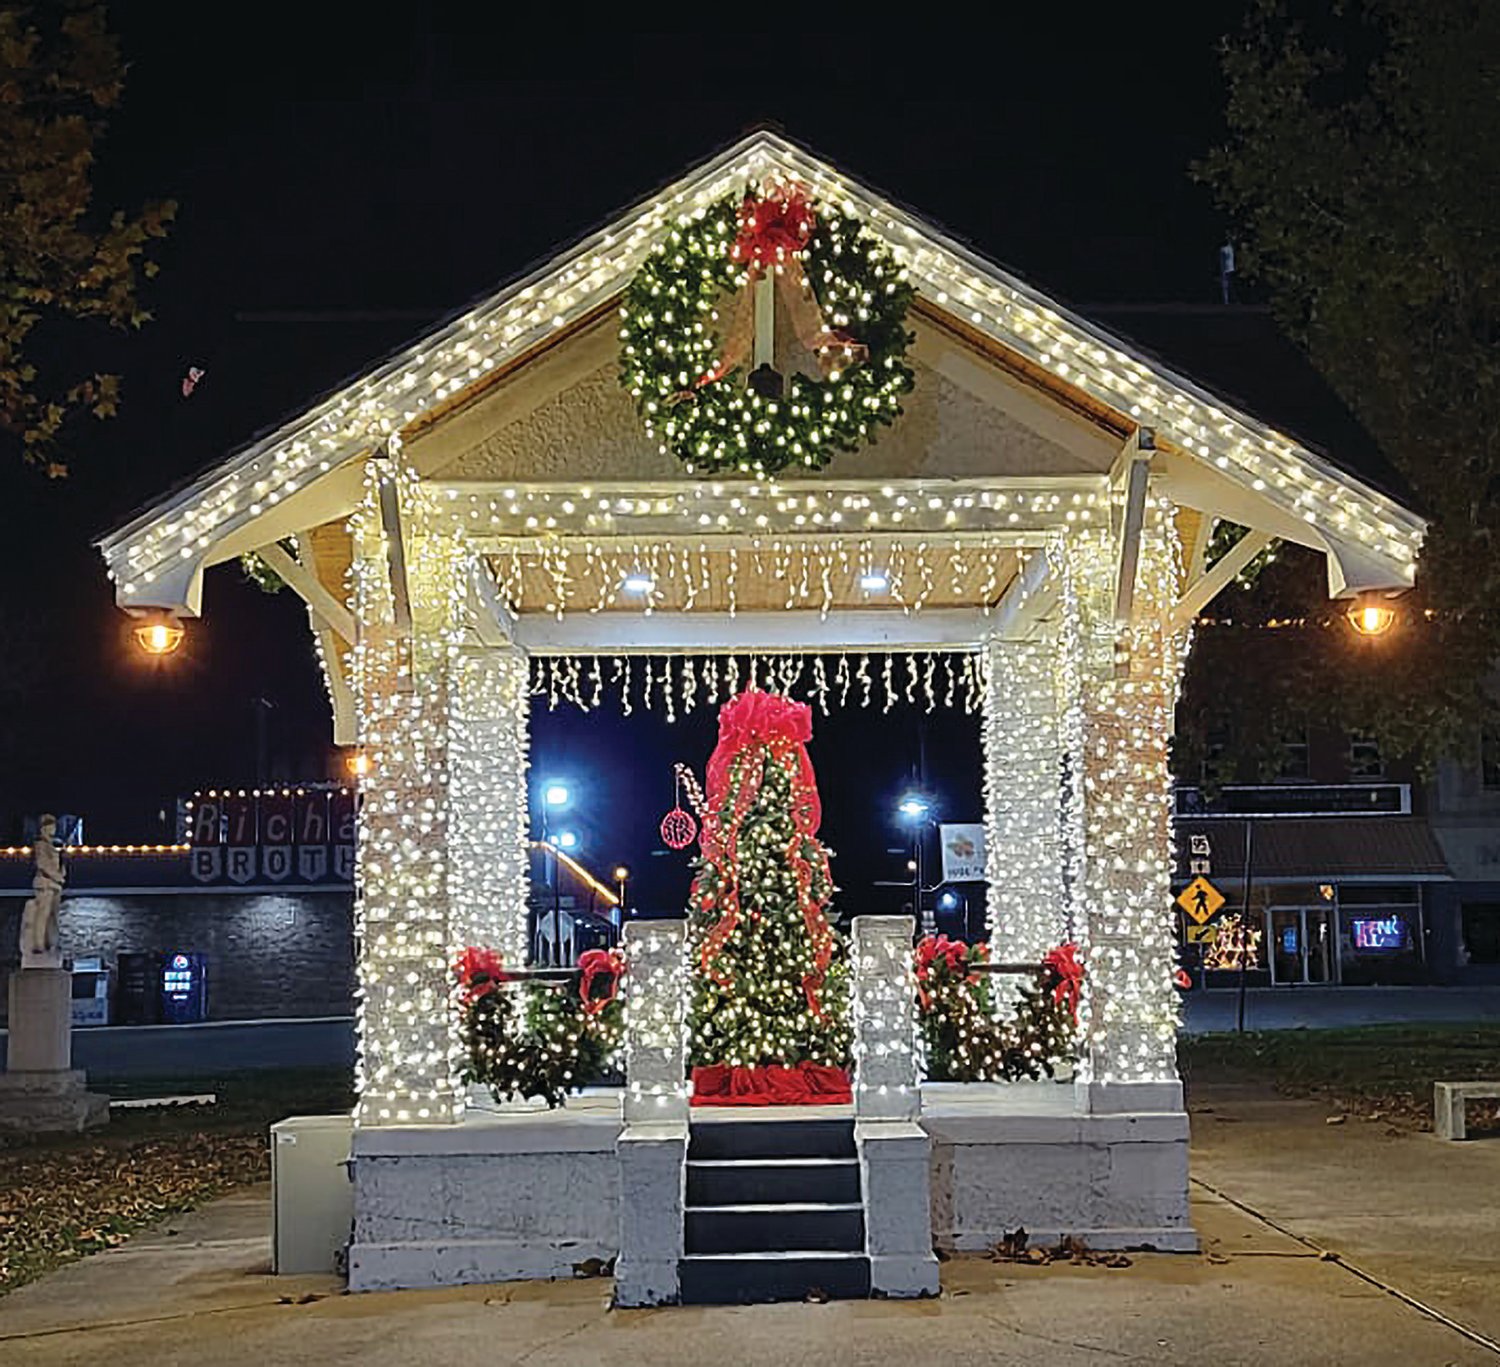 The Mountain Grove Bandstand is once again decorated for the Christmas holiday season on the Mountain Grove square. The location will also be the host site of this weekend’s Winterfest.